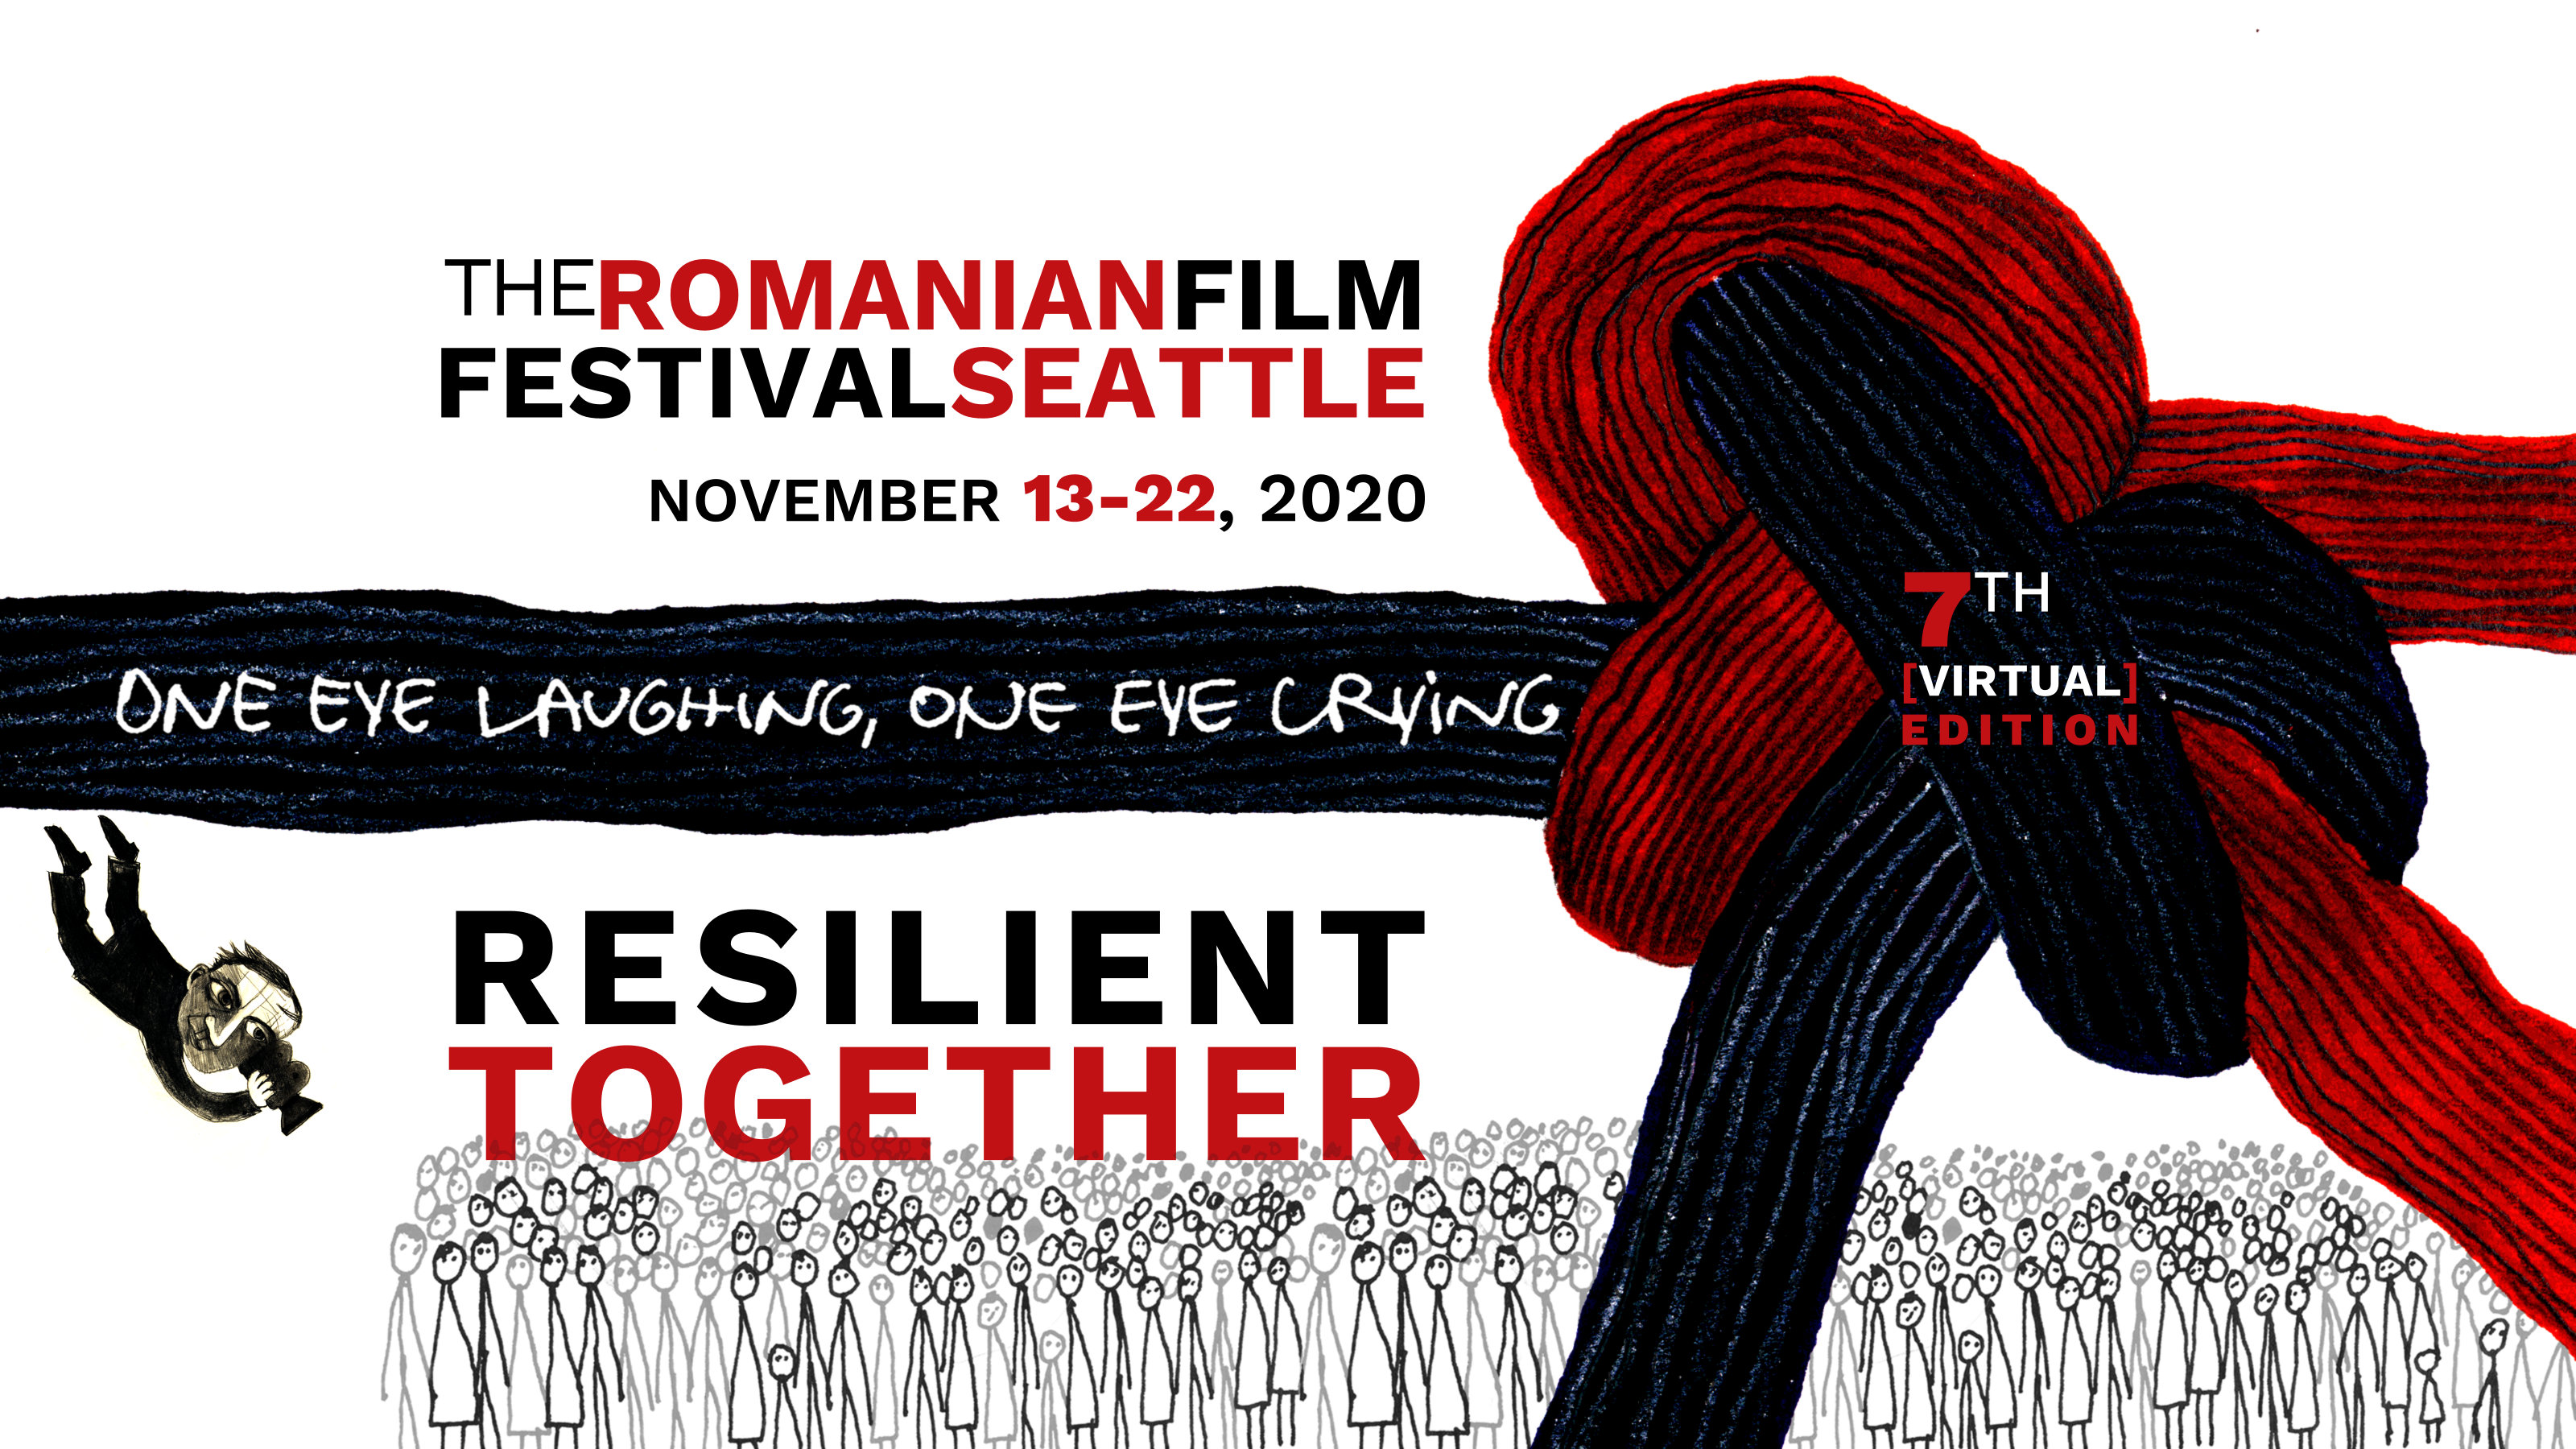 Poster image for Romanian Film Festival in Seattle -7th Edition